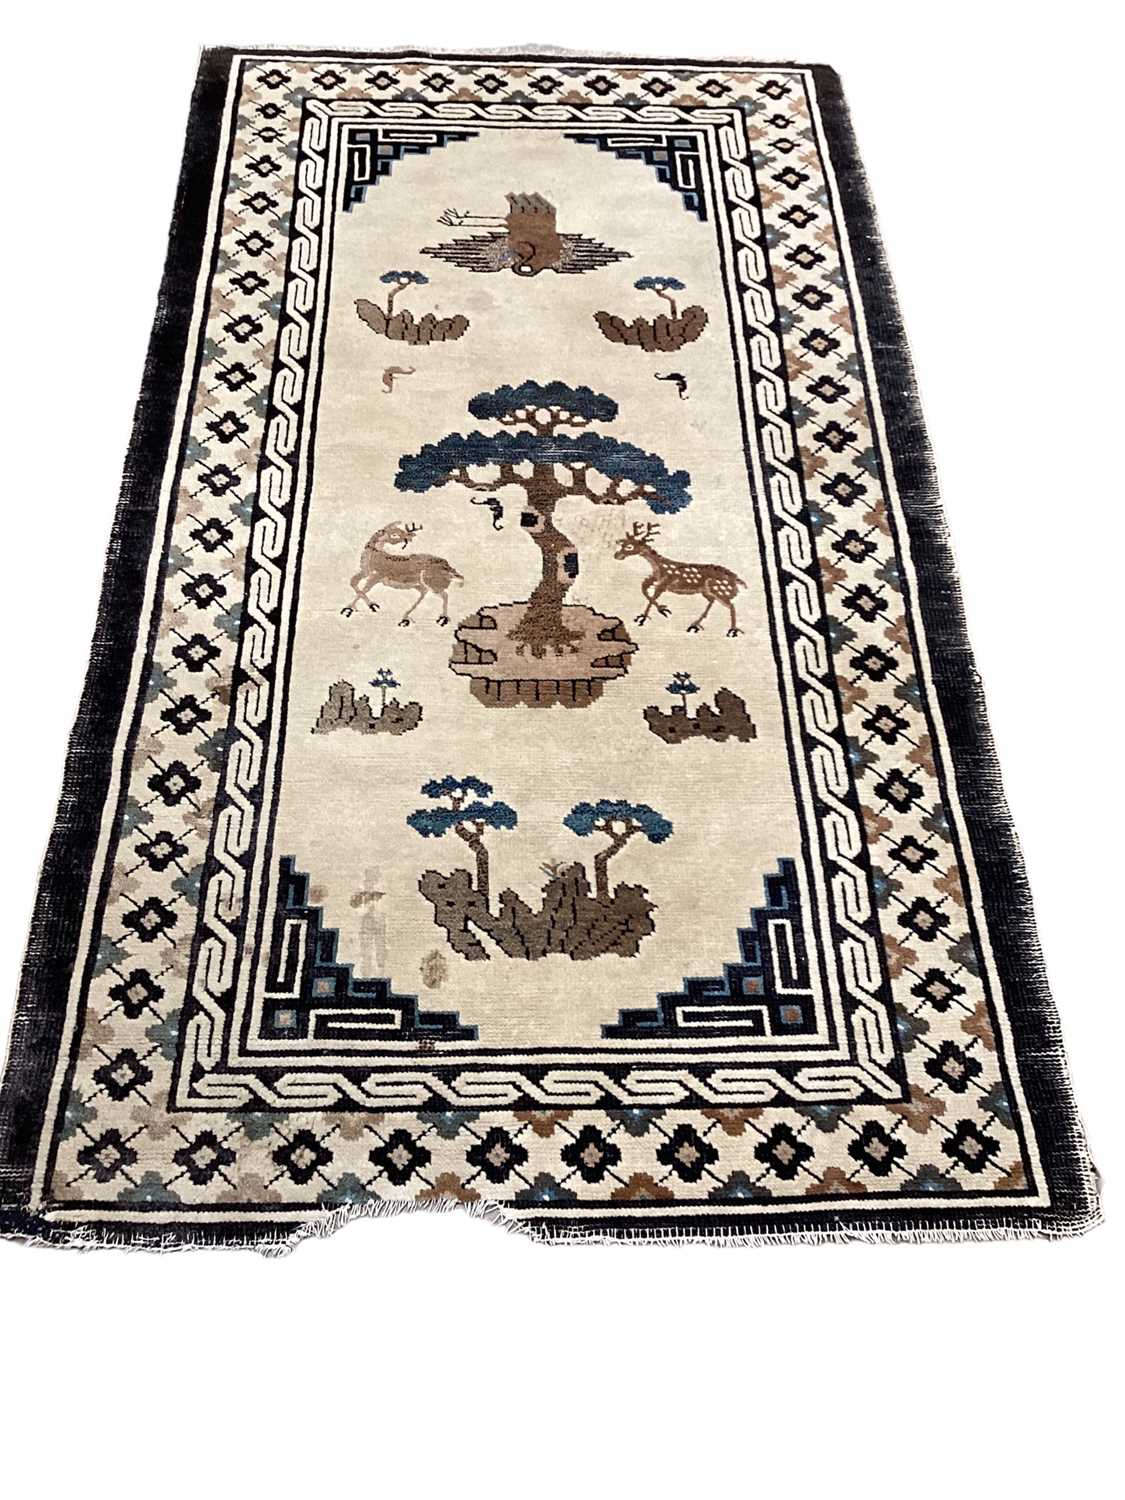 Chinese rug together with a narrow Persian rug